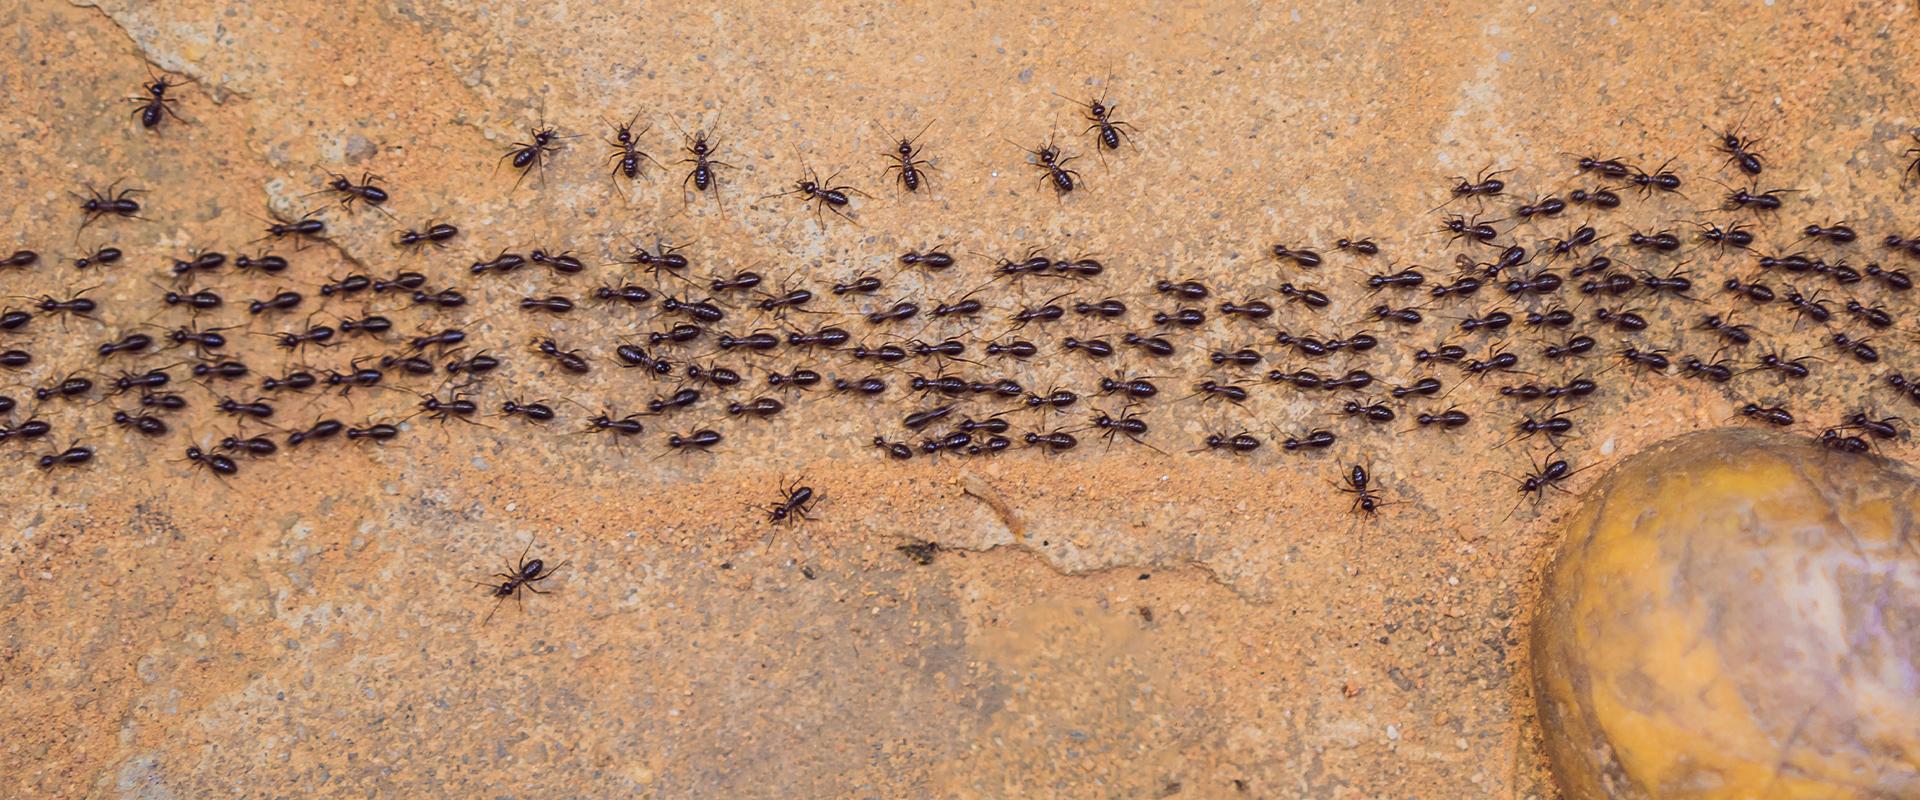 ants marching on dirt